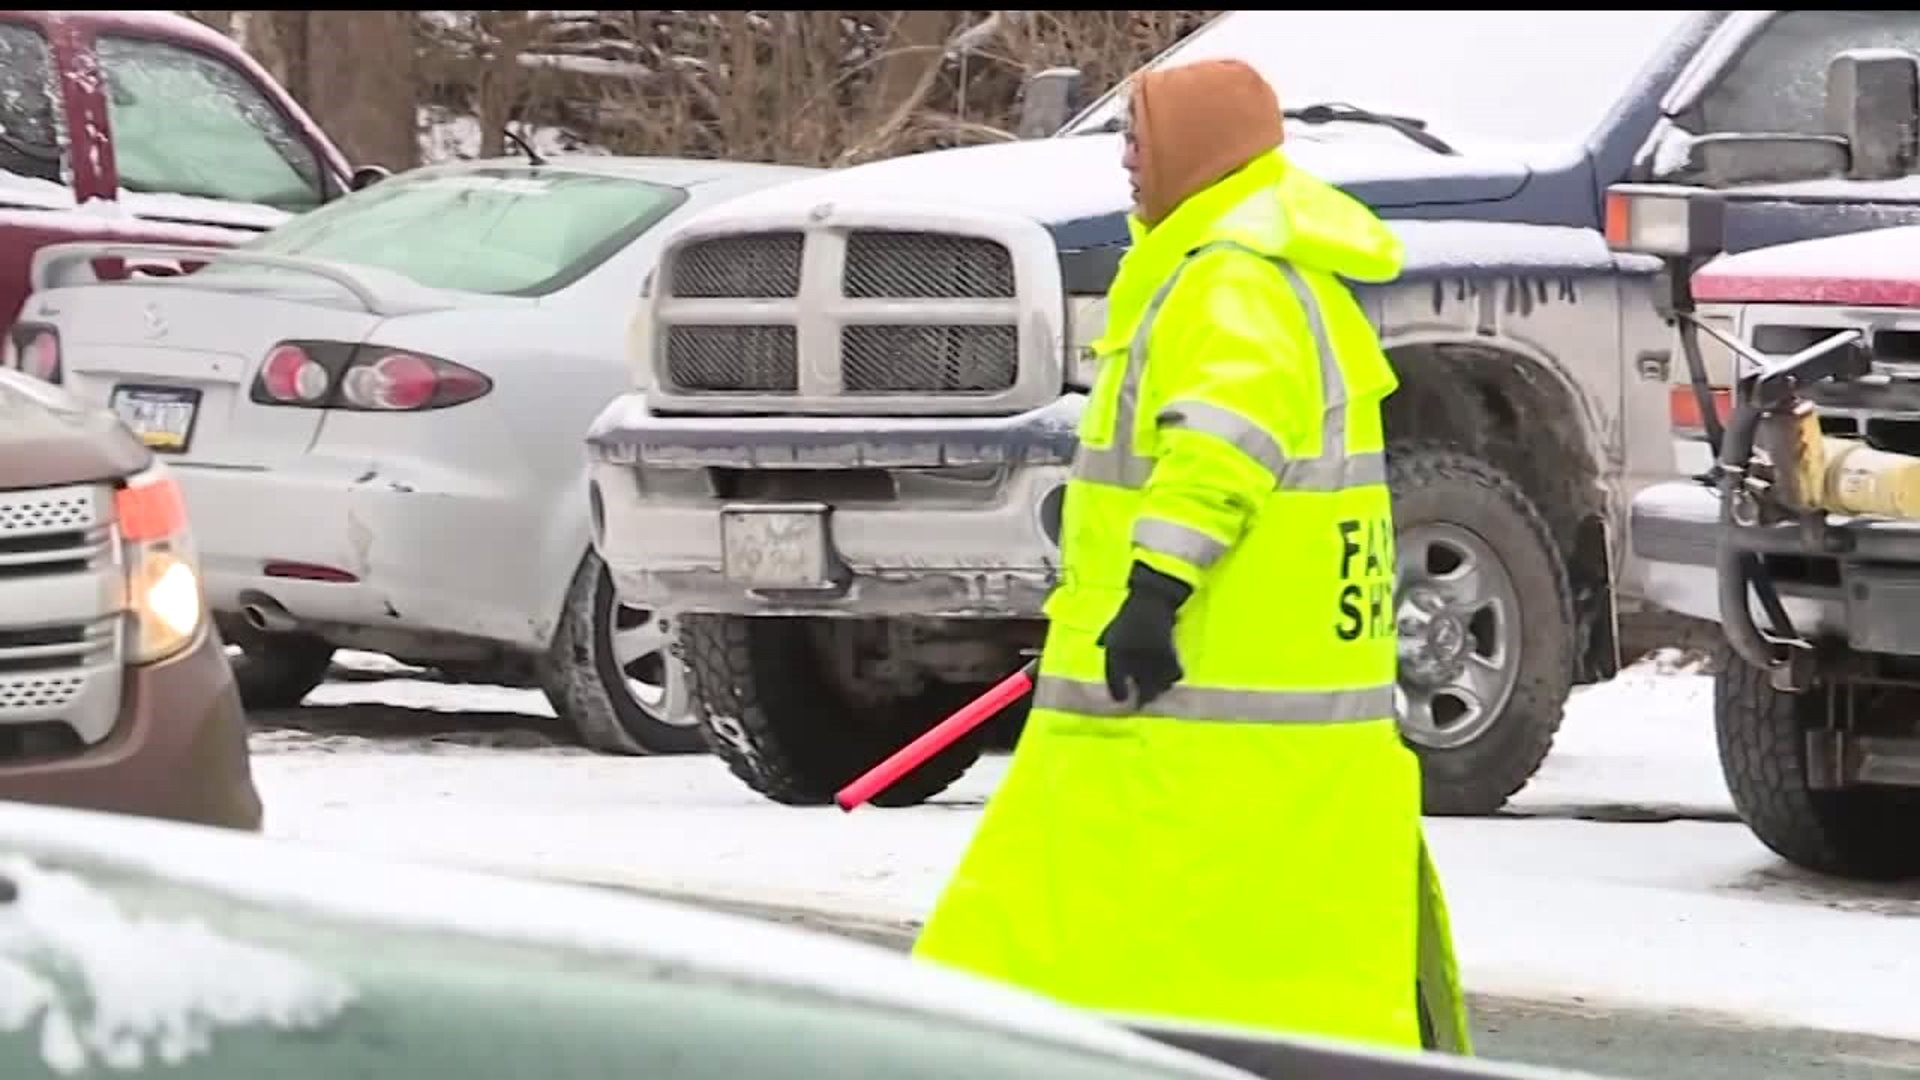 PA Farm Show workers battle cold weather